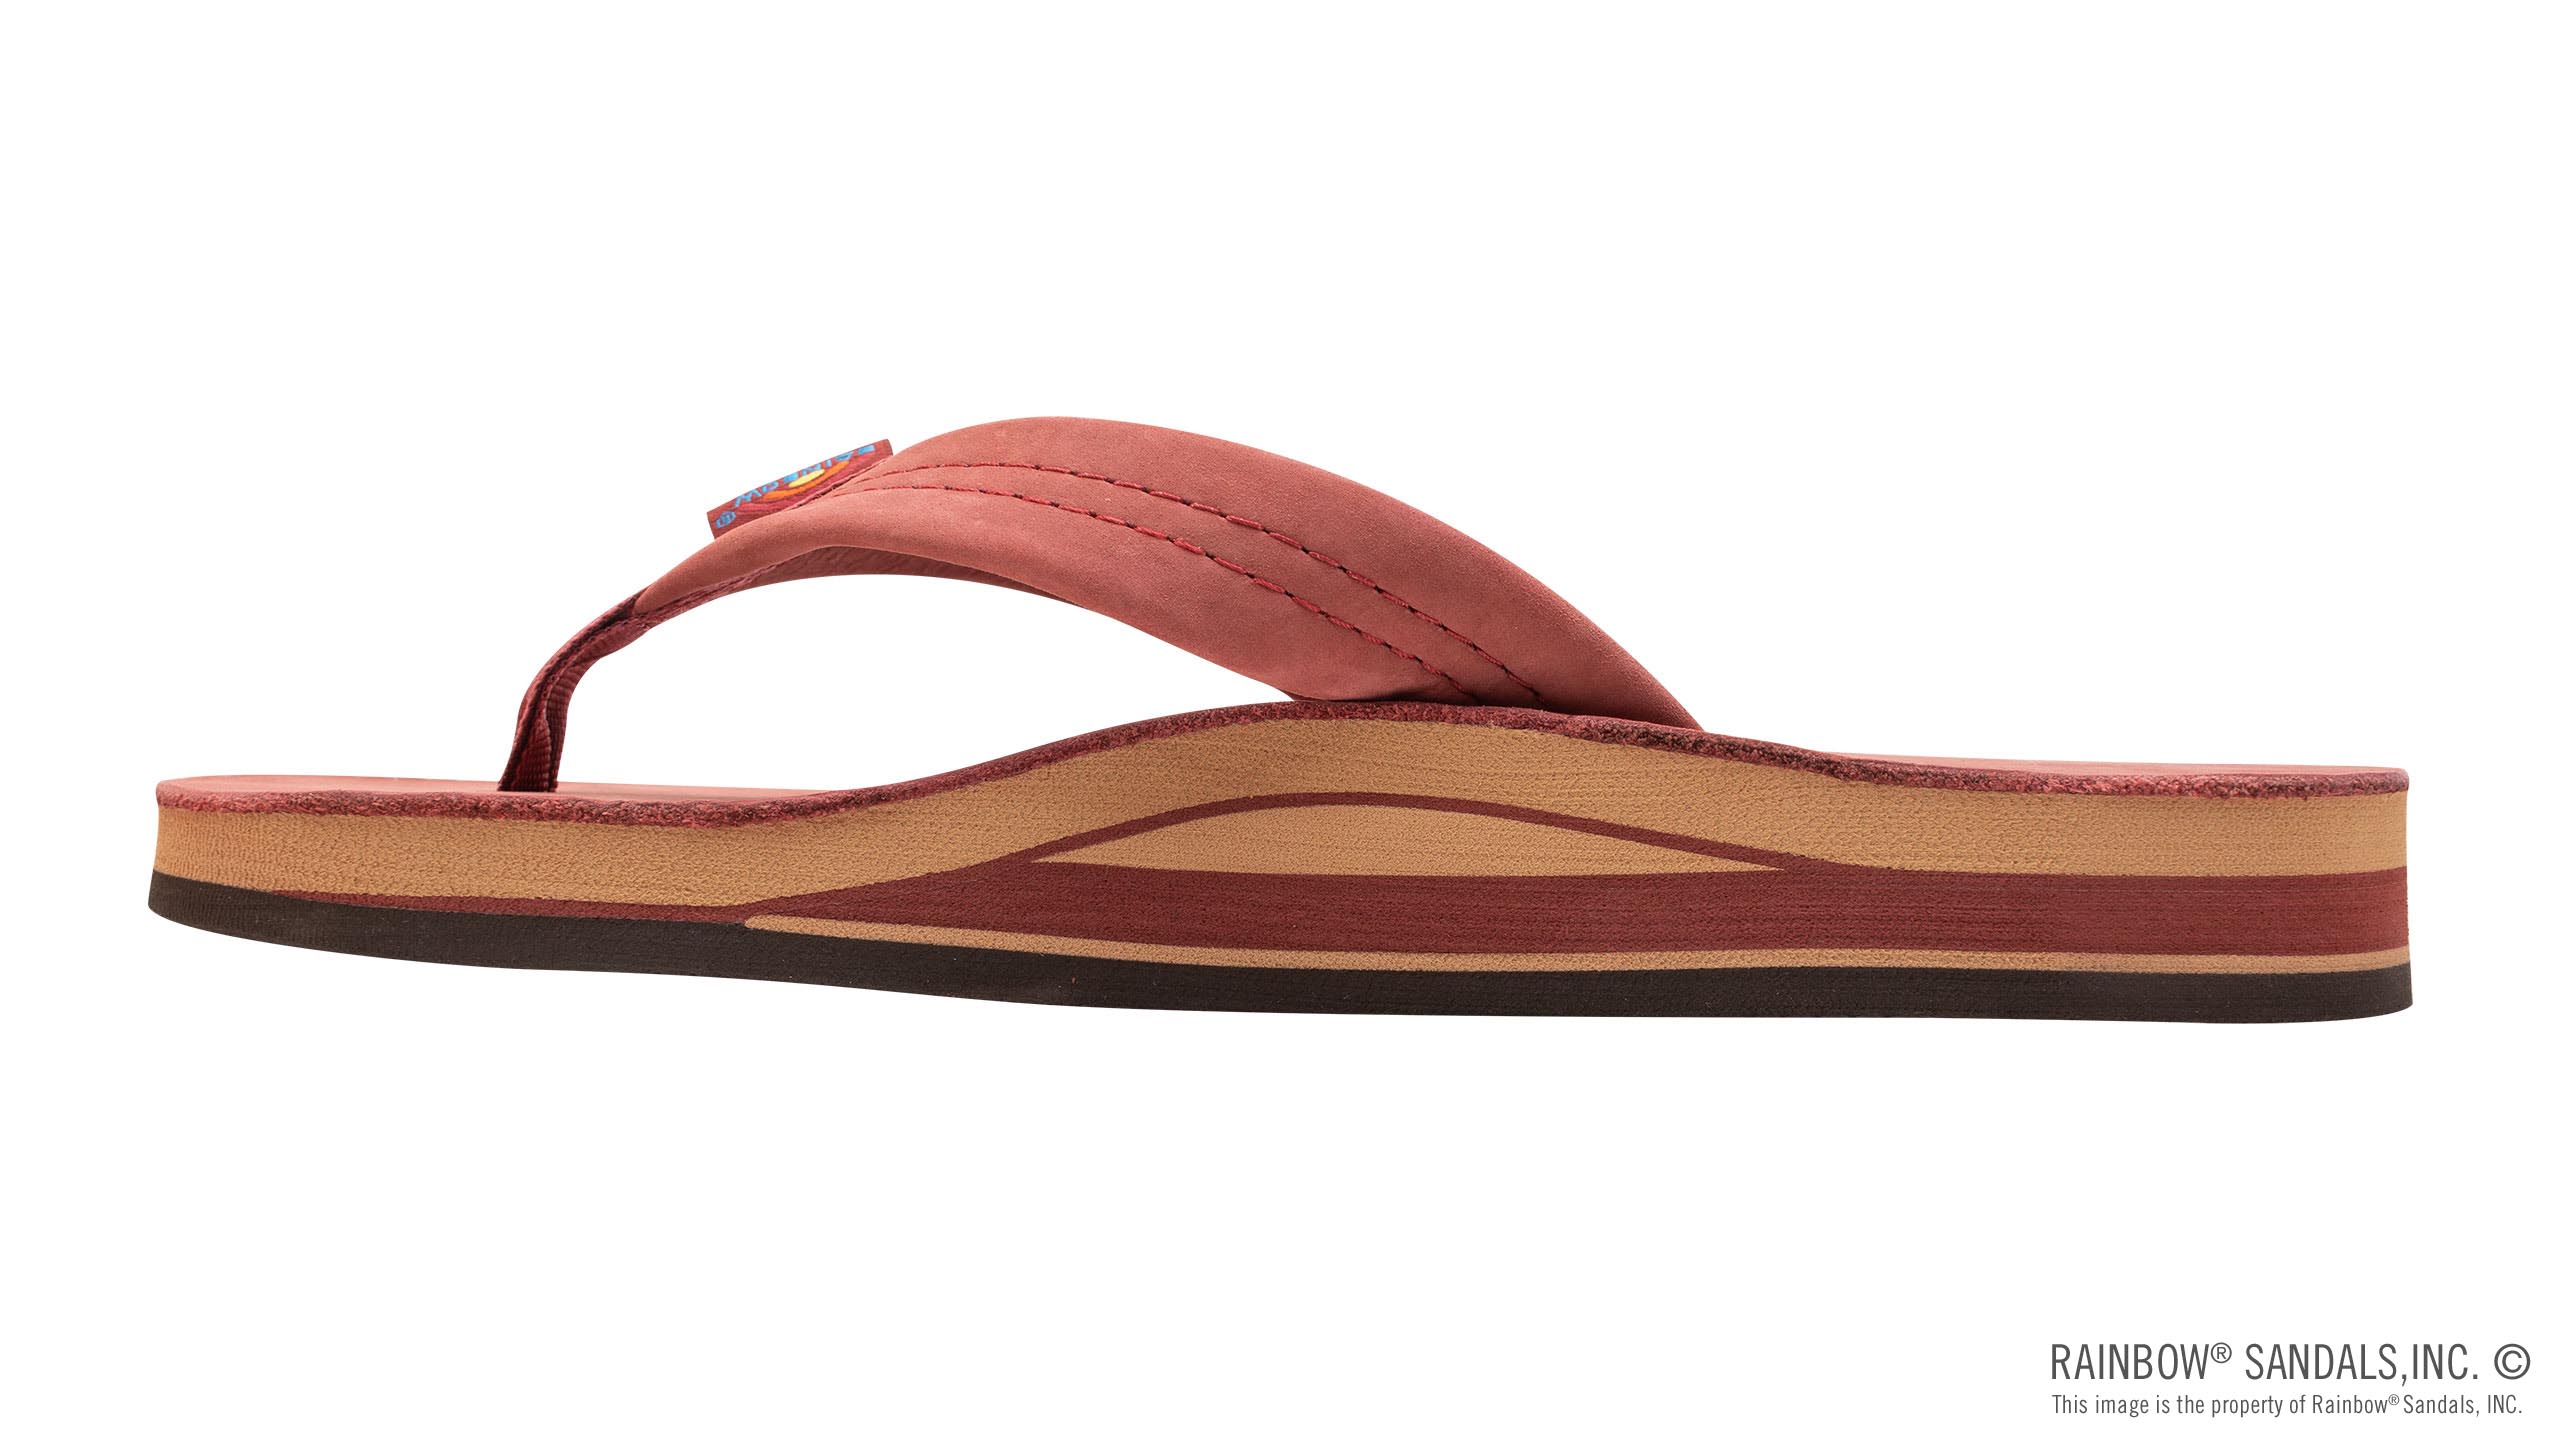 Rainbow Sandals Archives - Top Toad - Top Toad